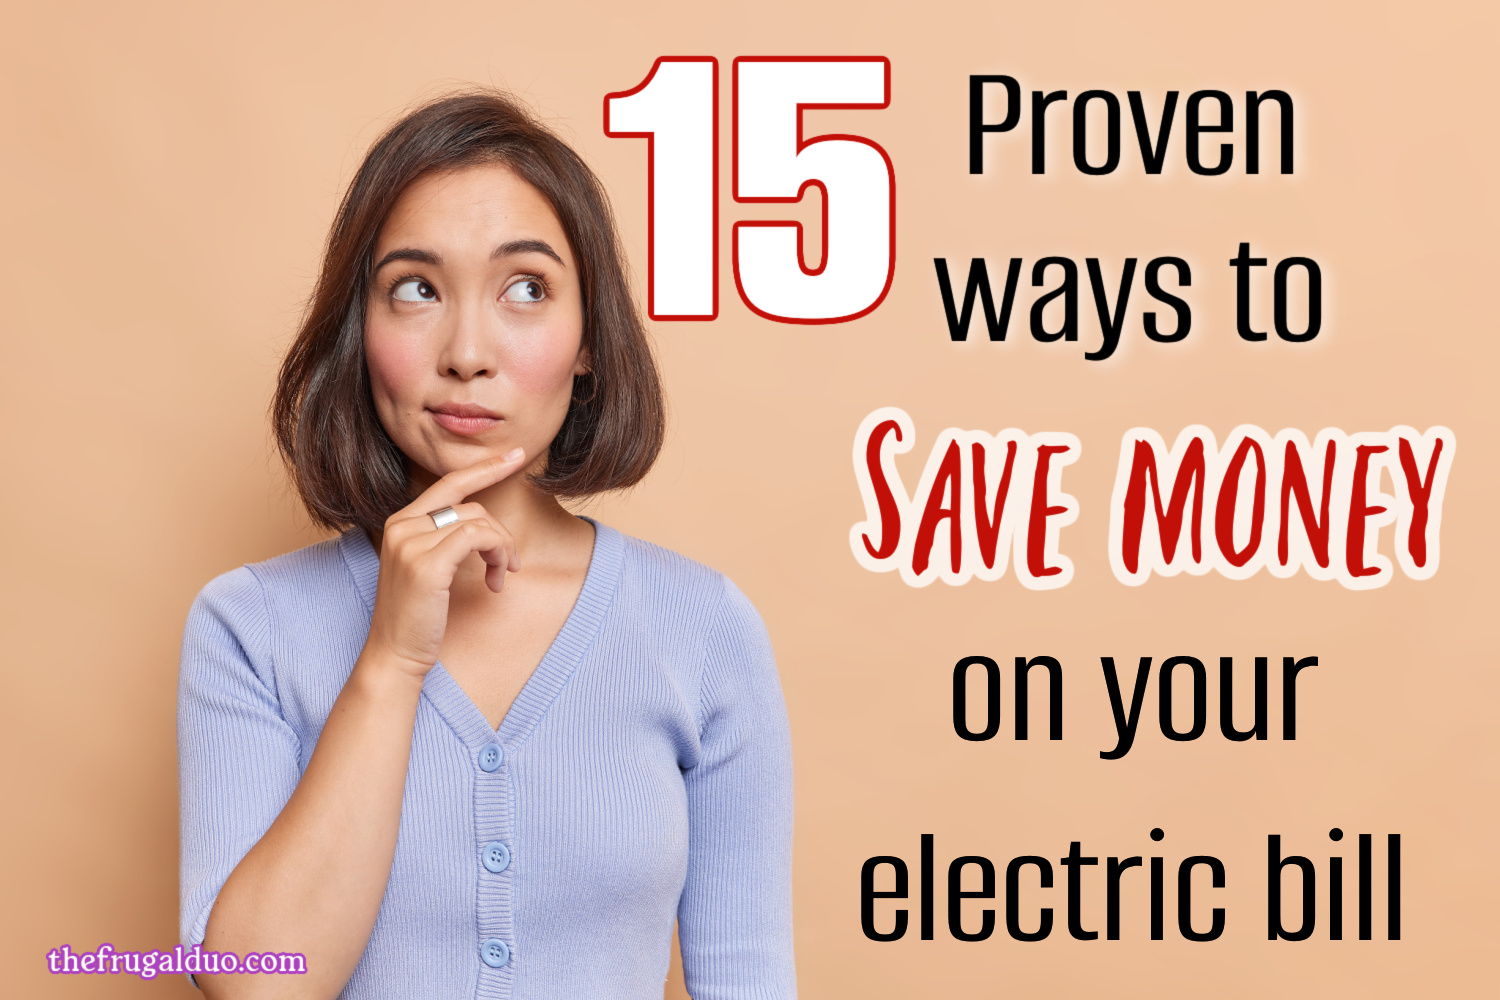 15 Proven Ways to Save Money on Your Electric Bill